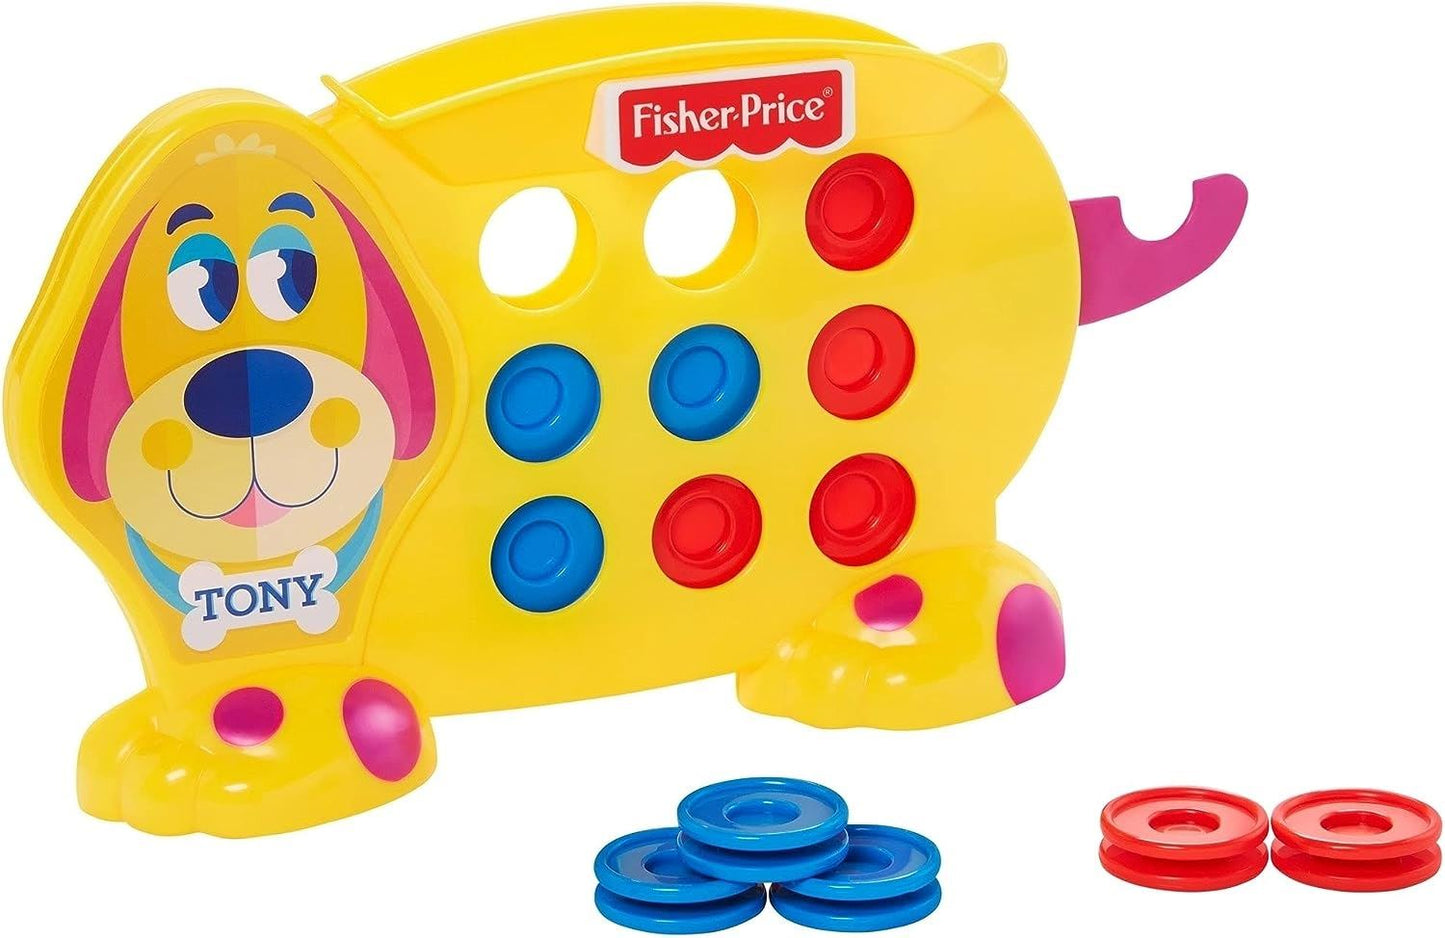 Fisher-Price Tic Tac Tony Pre-School Kids Game Ages 3+ GWN53